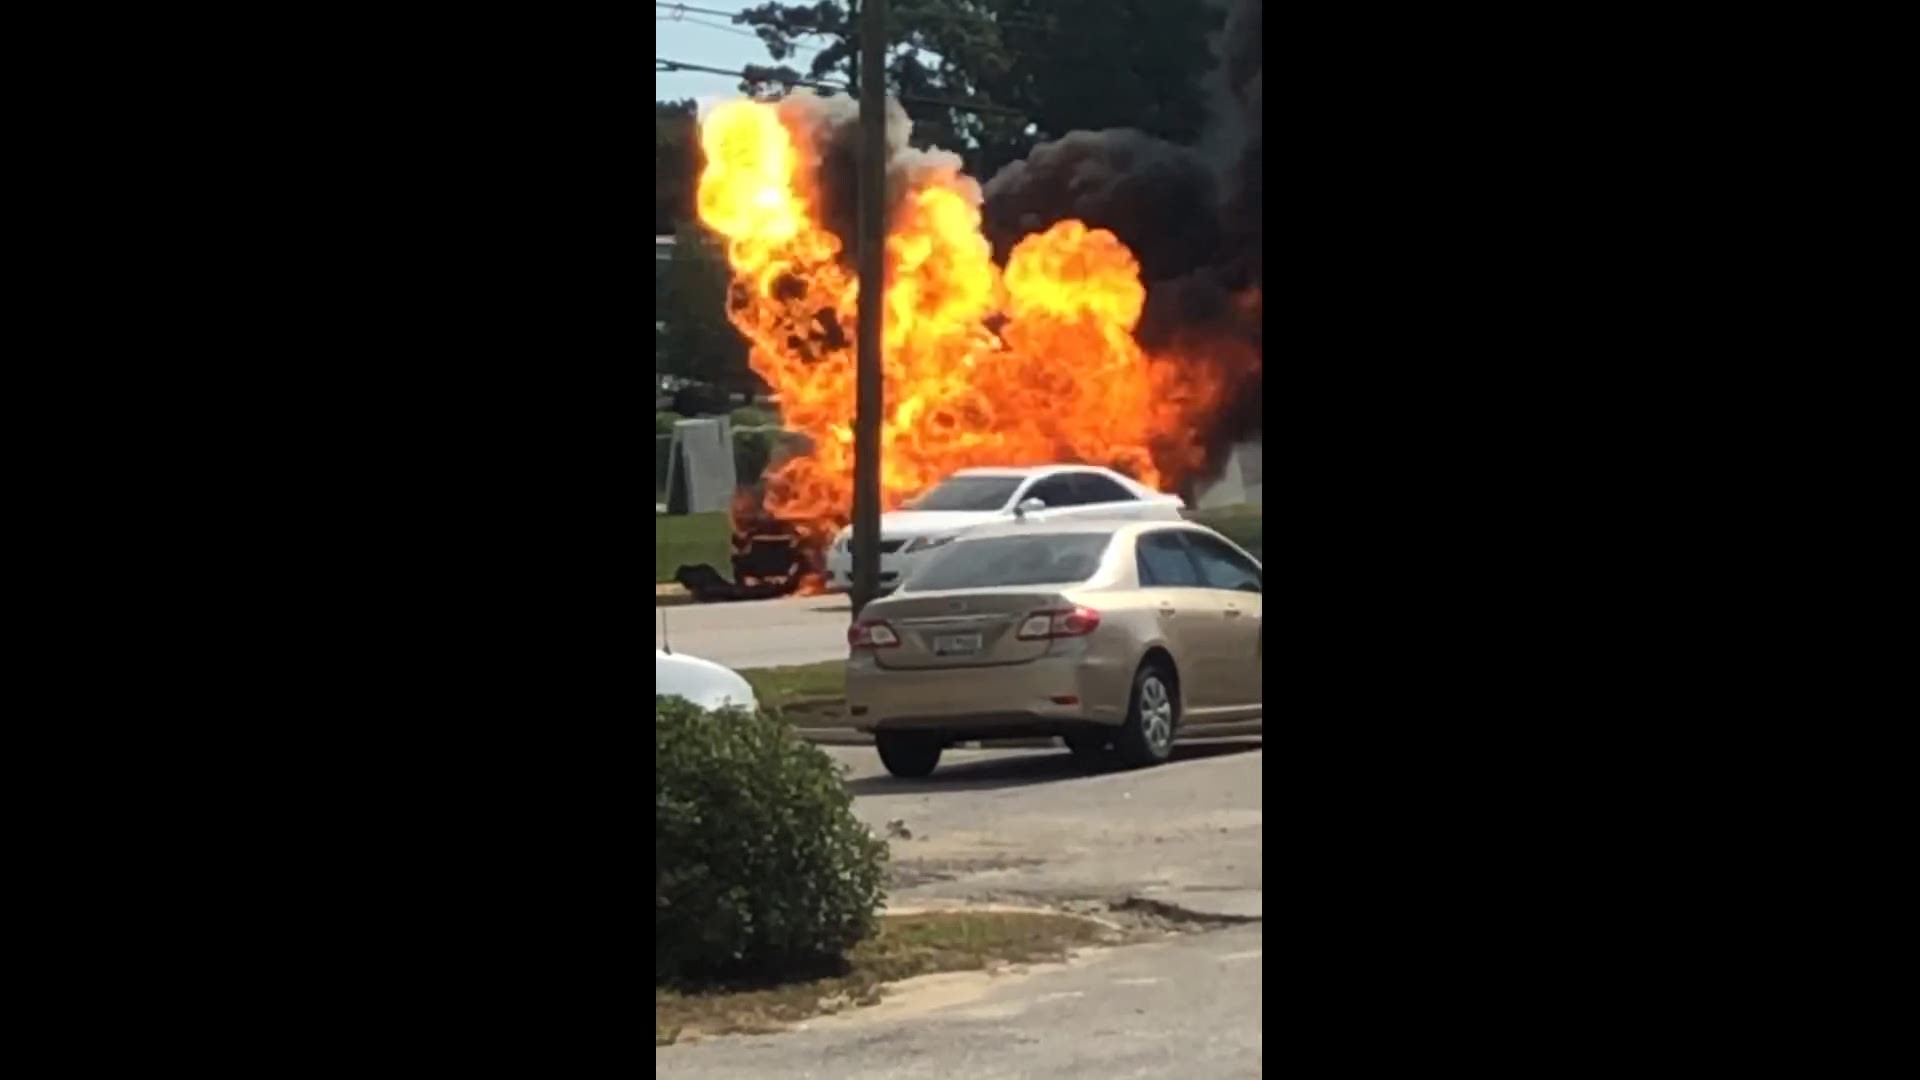 A car fire on Sunset Blvd in West Columbia had fire fighters being extra cautious as the heat exploded ammunition in the car. (Video: Chase wicker)